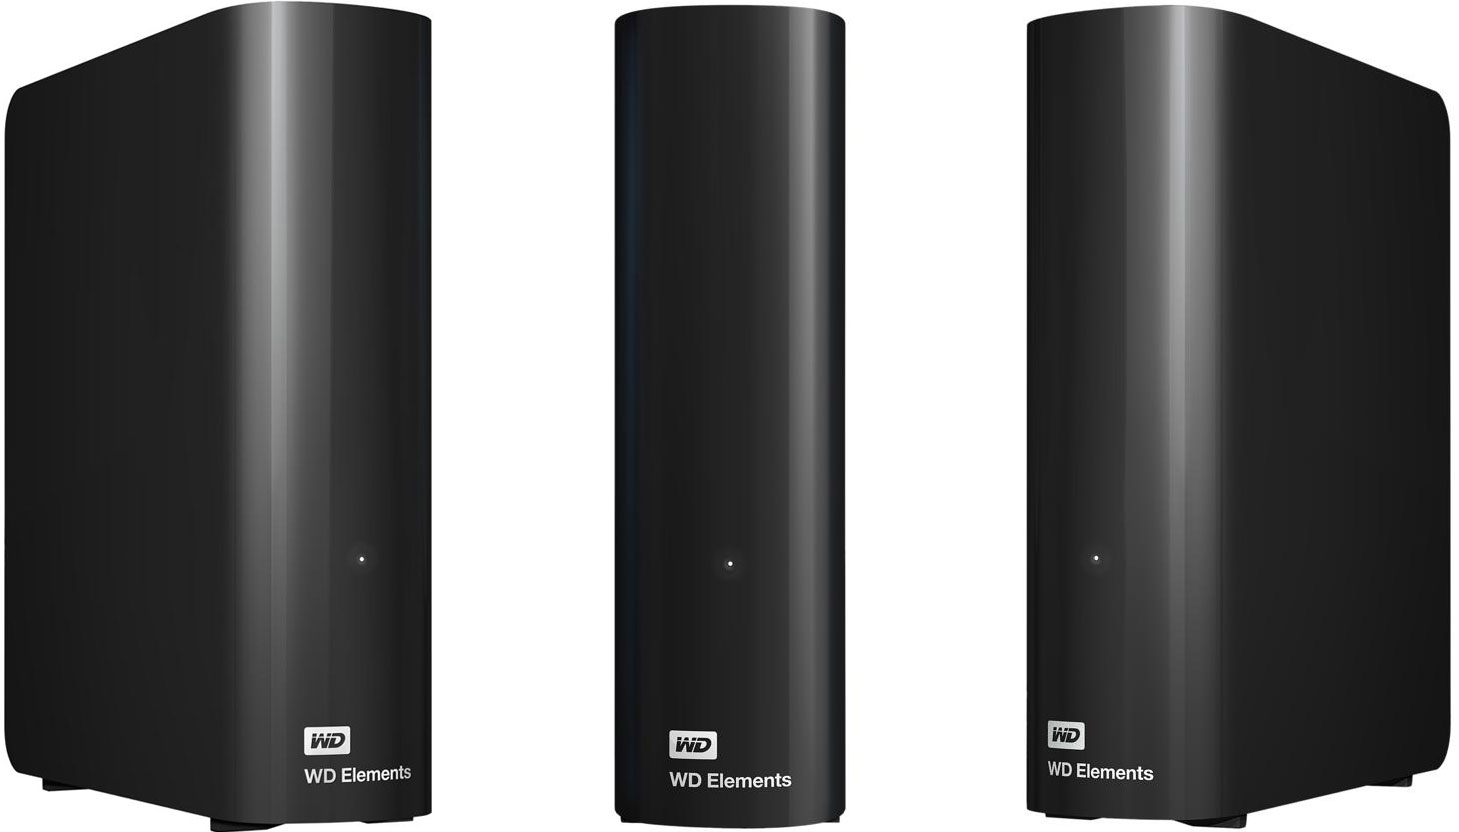 WD’s portable 4TB Elements hard drive is on sale for $95